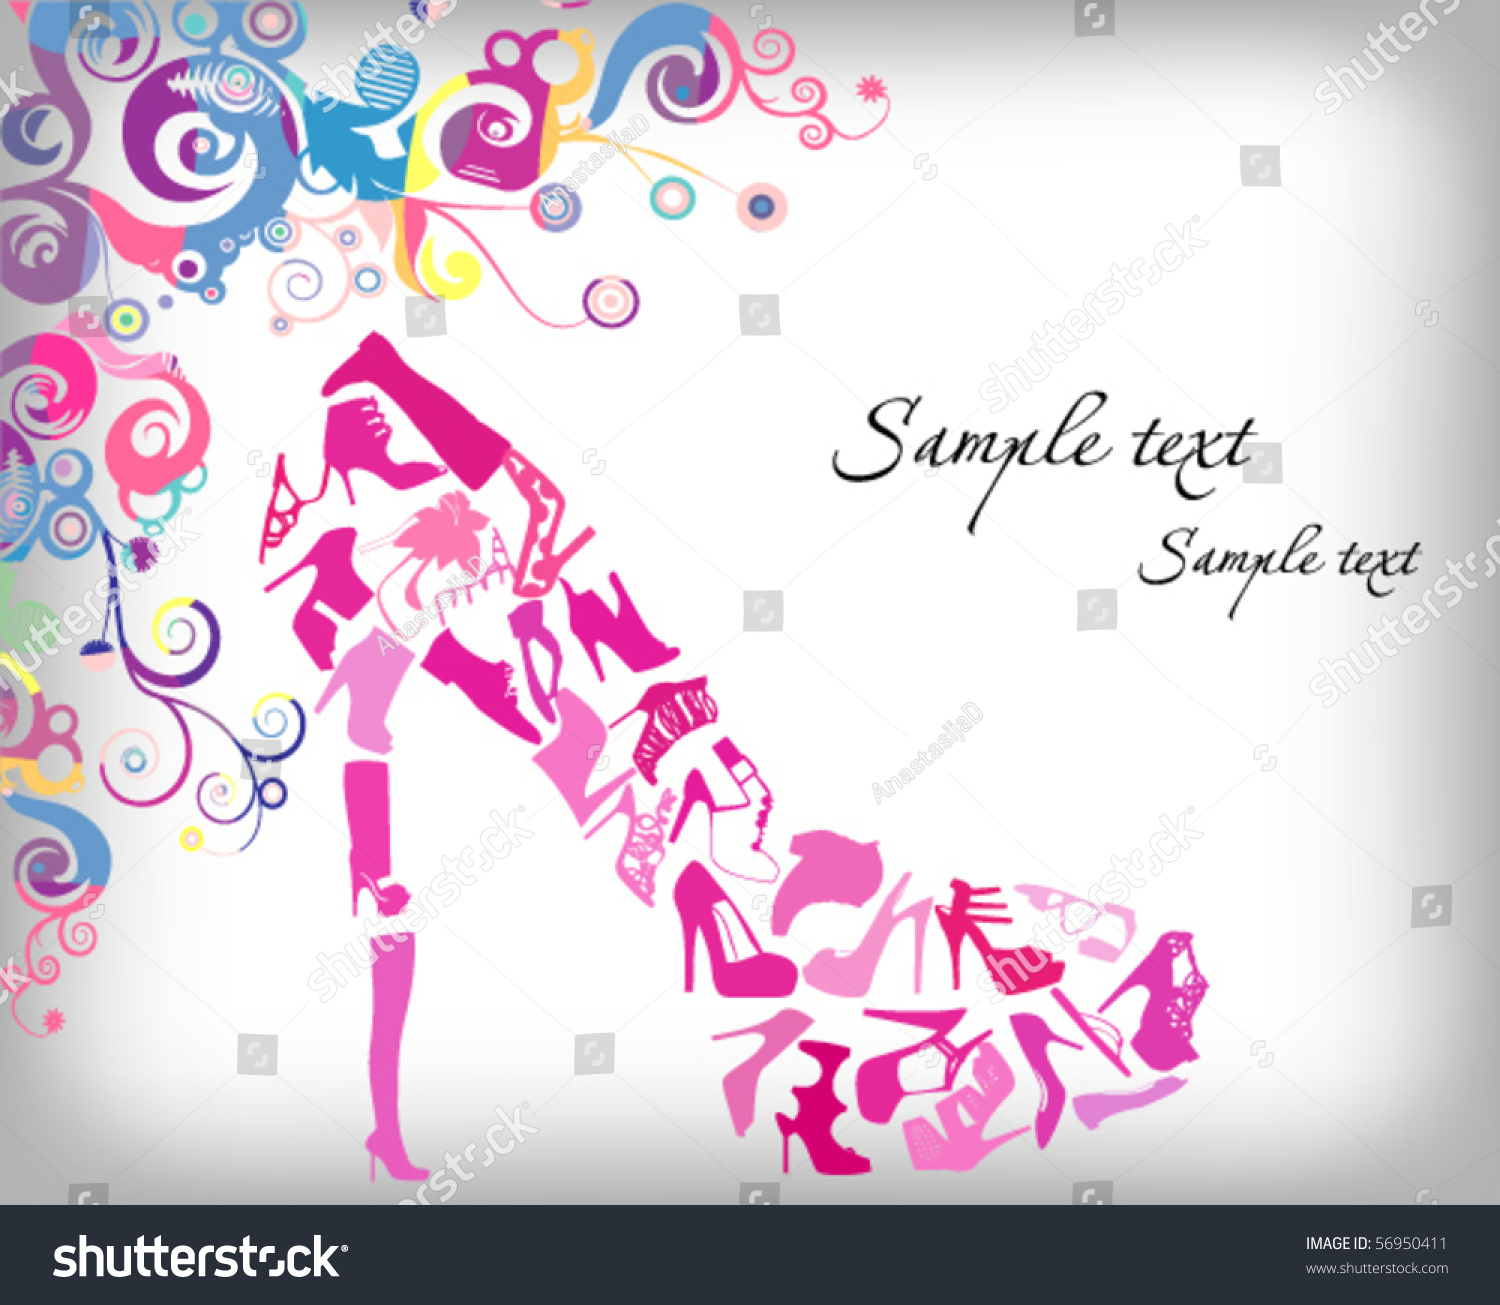 Fashion Shoes Background With Grunge Pattern Stock Vector Illustration ...